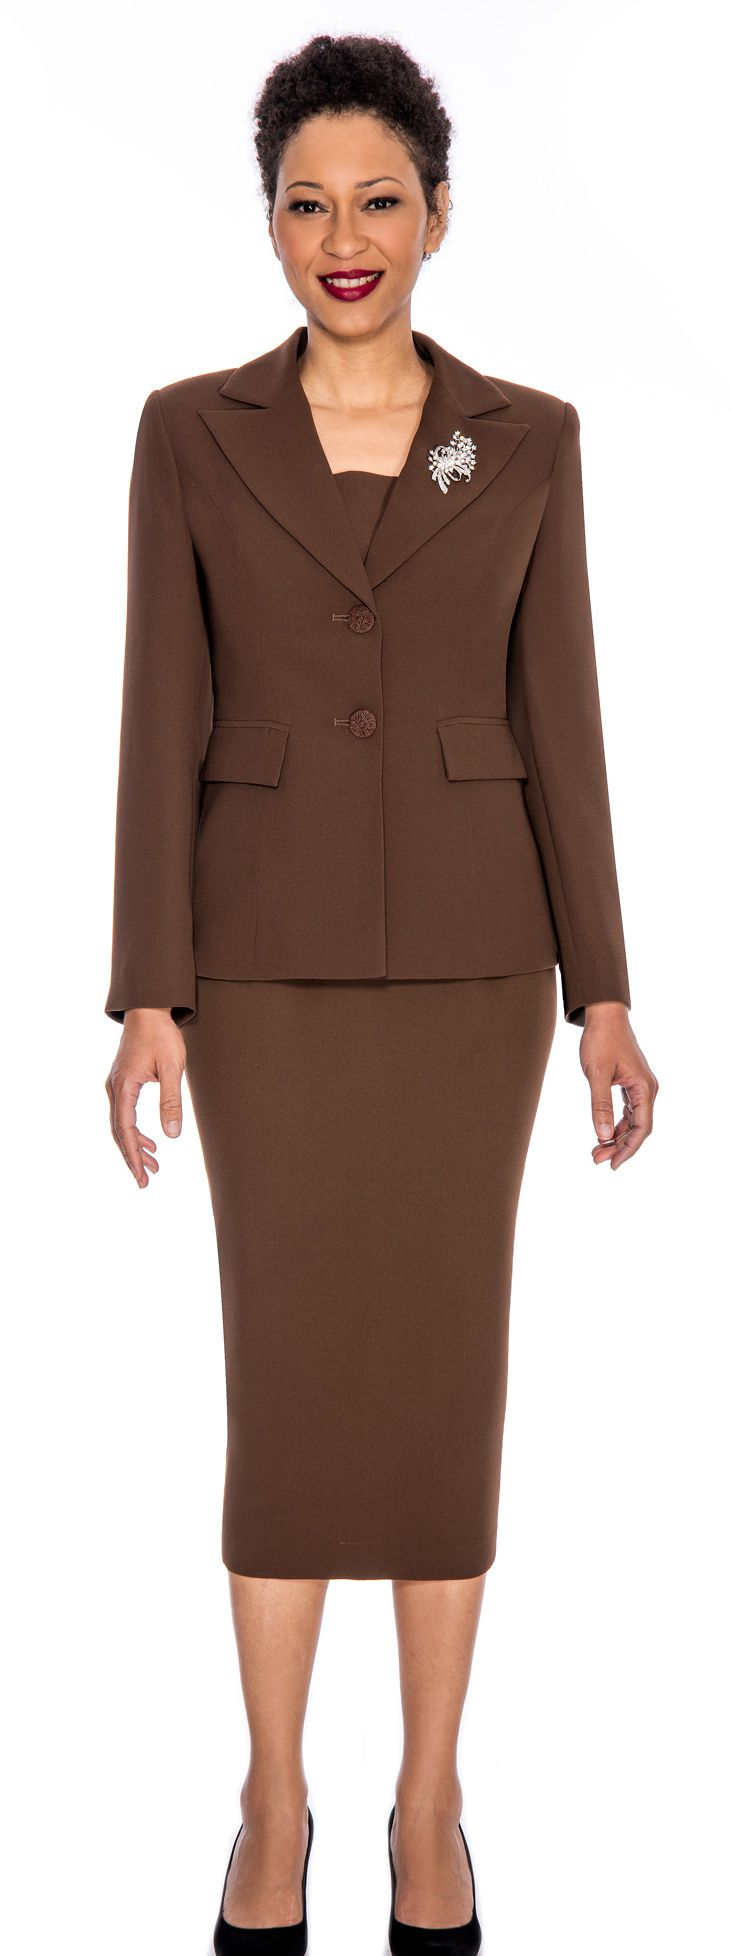 Giovanna Usher Suit 0710-Chocolate - Church Suits For Less